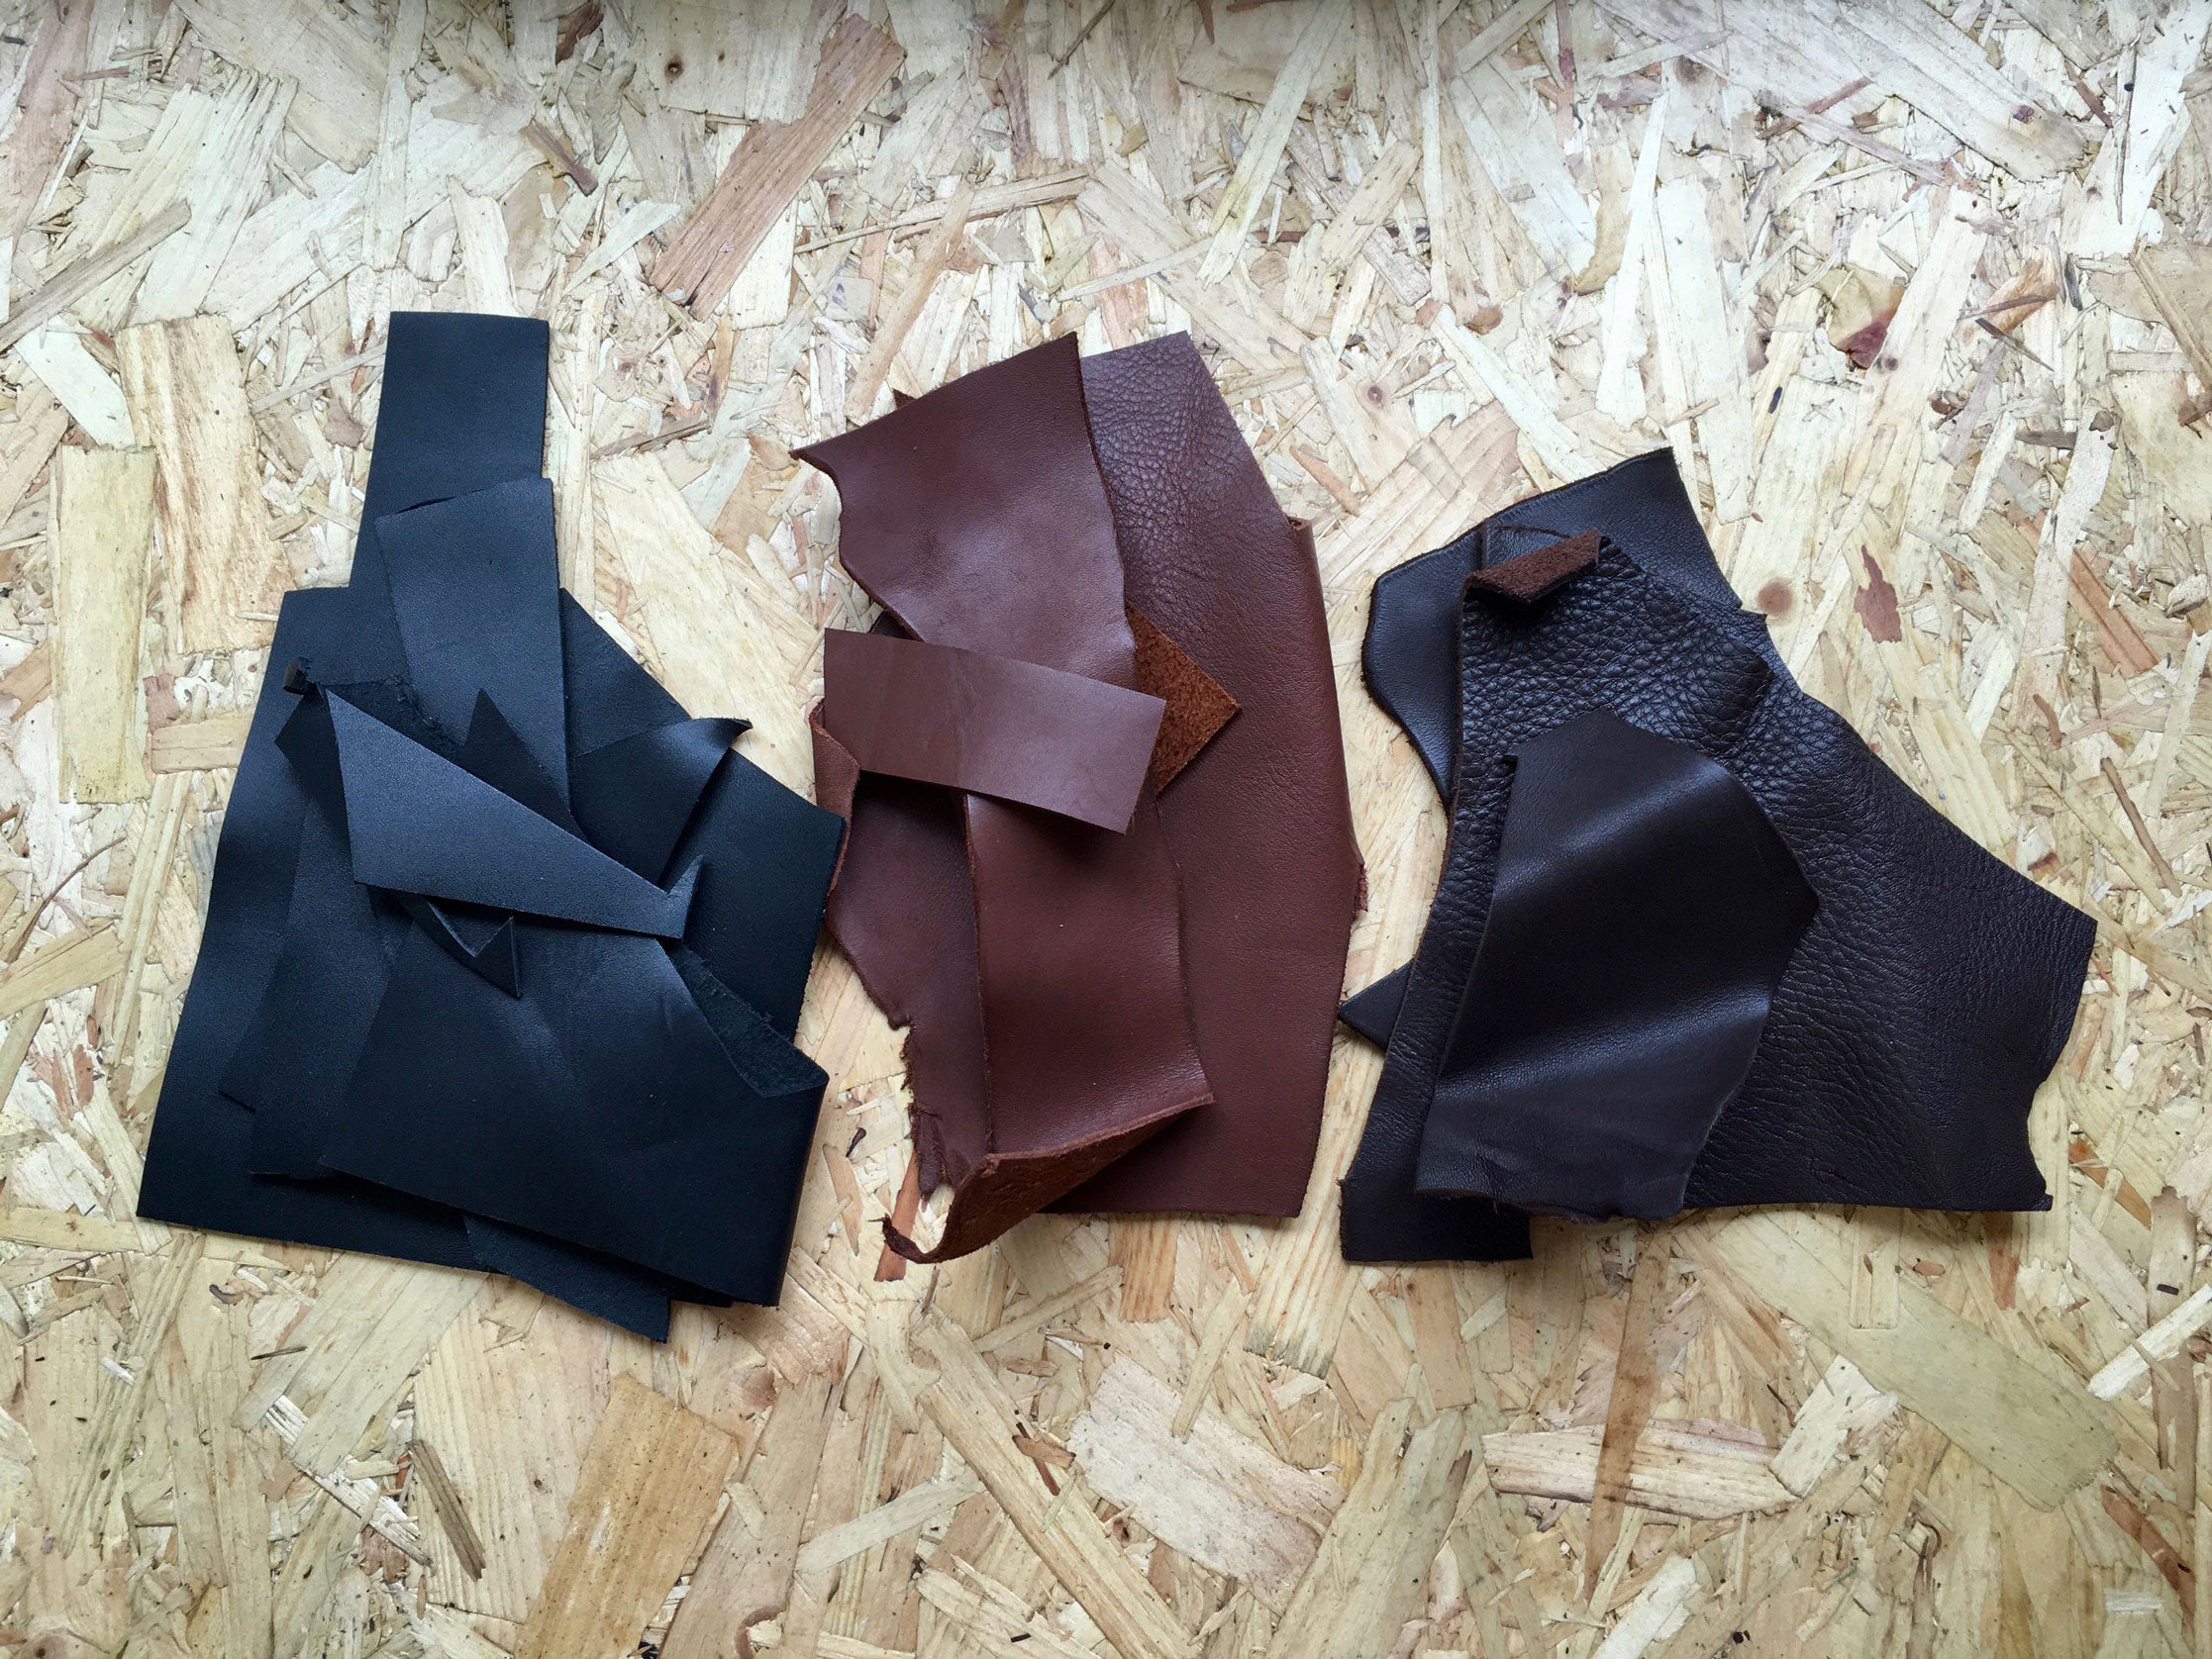 All available colours - black, light brown and dark brown, Scrap Leather Offcuts – Light Brown Cowhide Leather Pieces by Bookshell Bindery